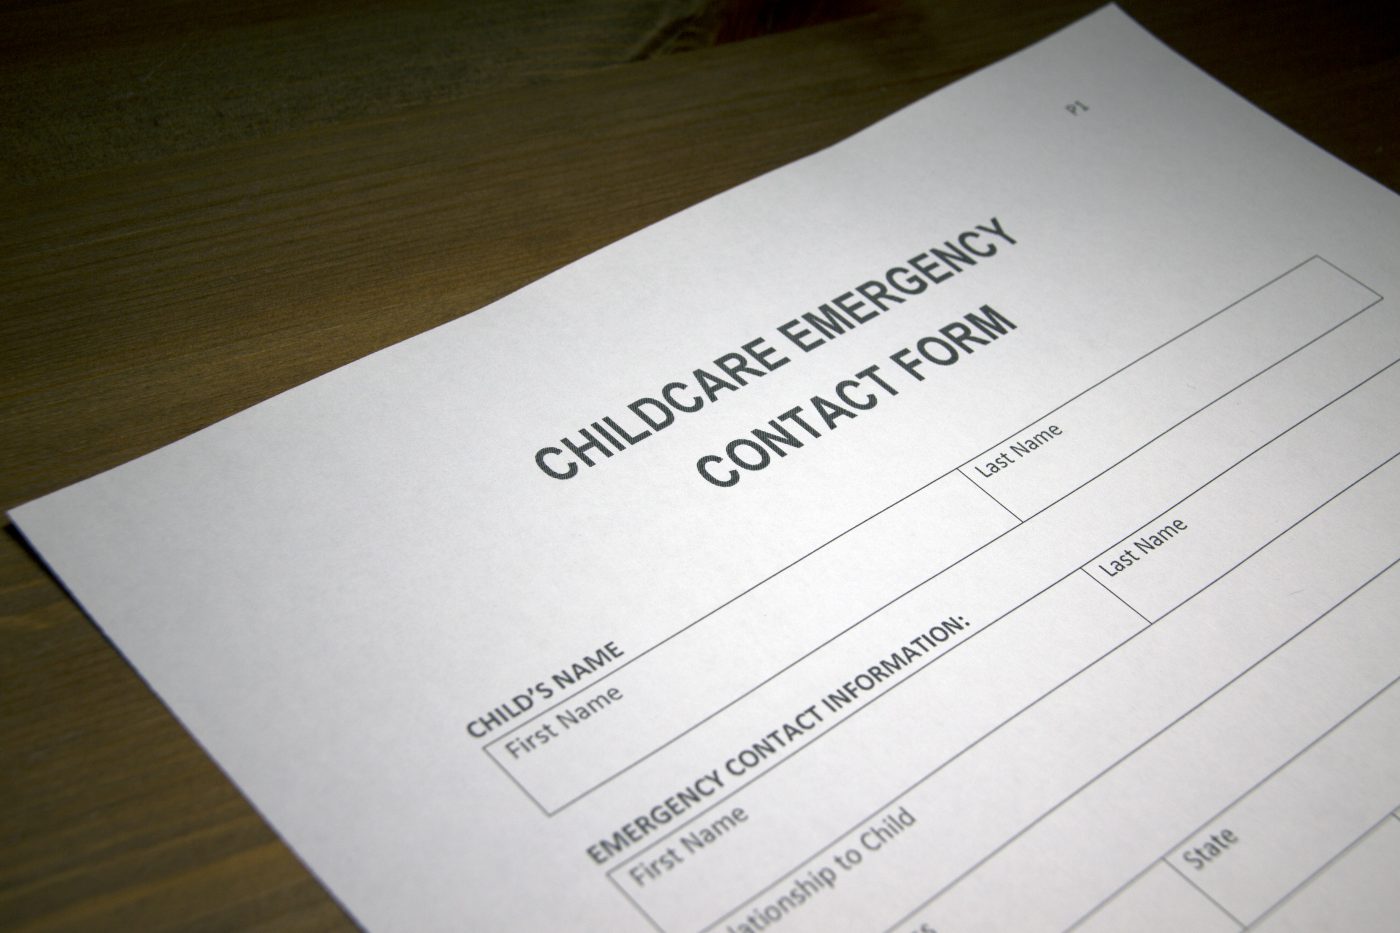 Someone filling out Childcare Emergency Contact Form.